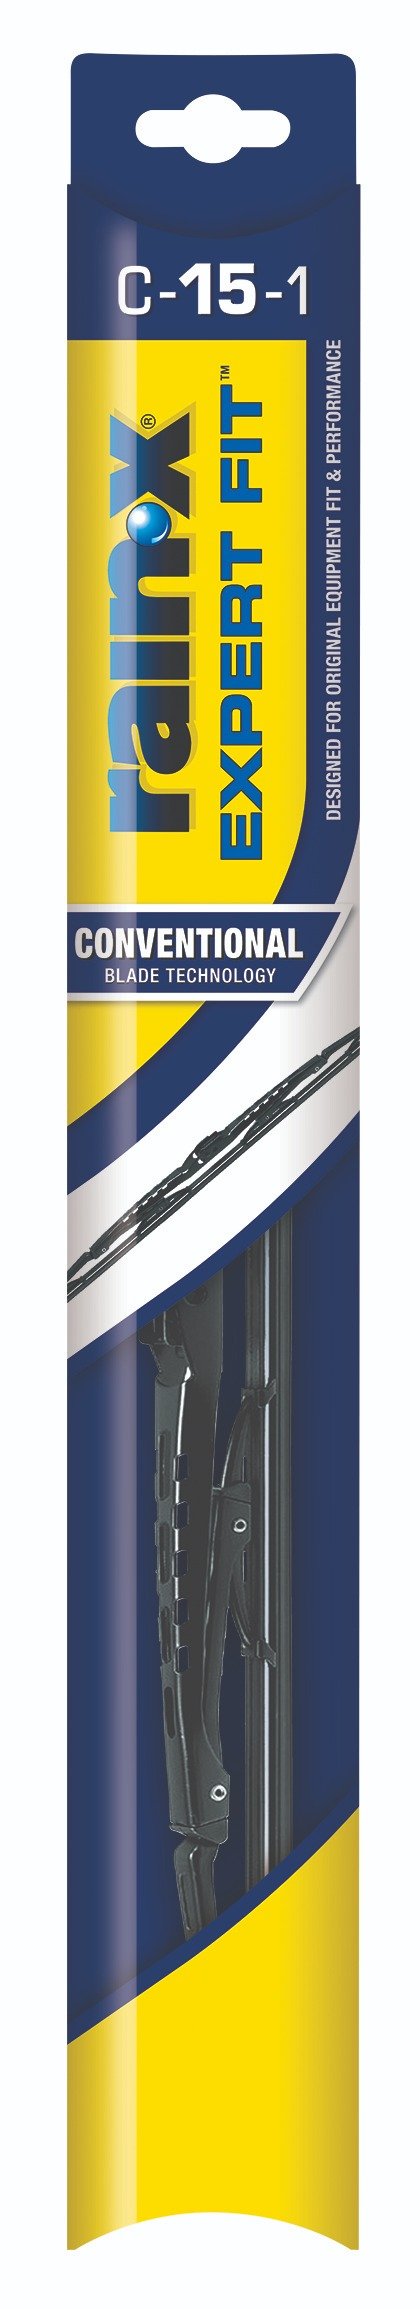 Expert Fit Conventional Windshield Wiper Blade, 15 Inch Refill Replacement C15-1 – 860015